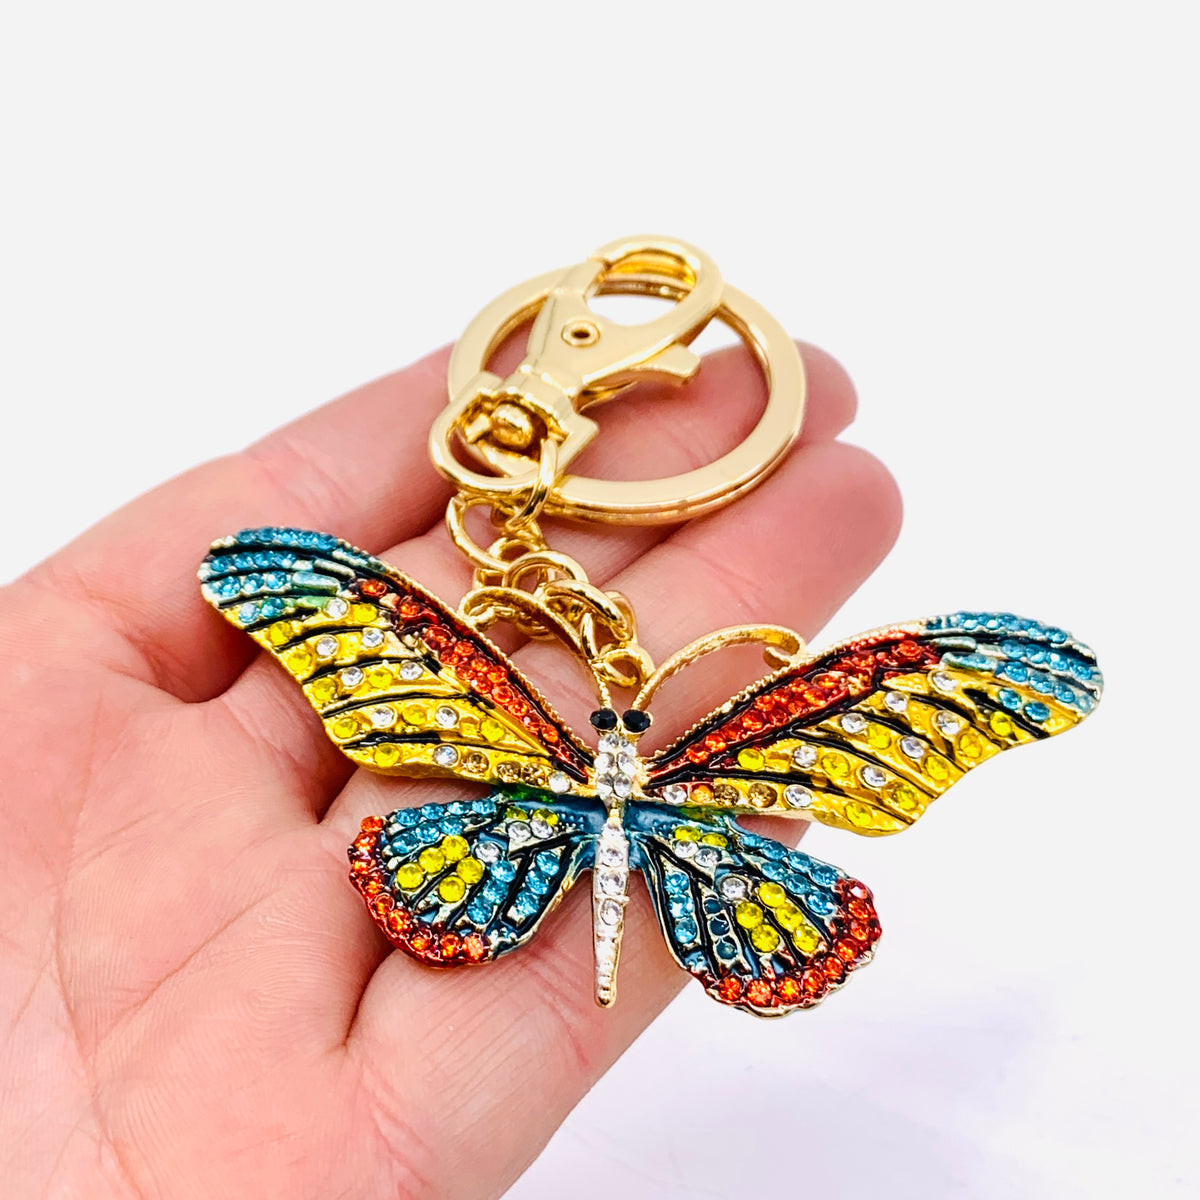 Bejeweled Key Chain 7, Butterfly